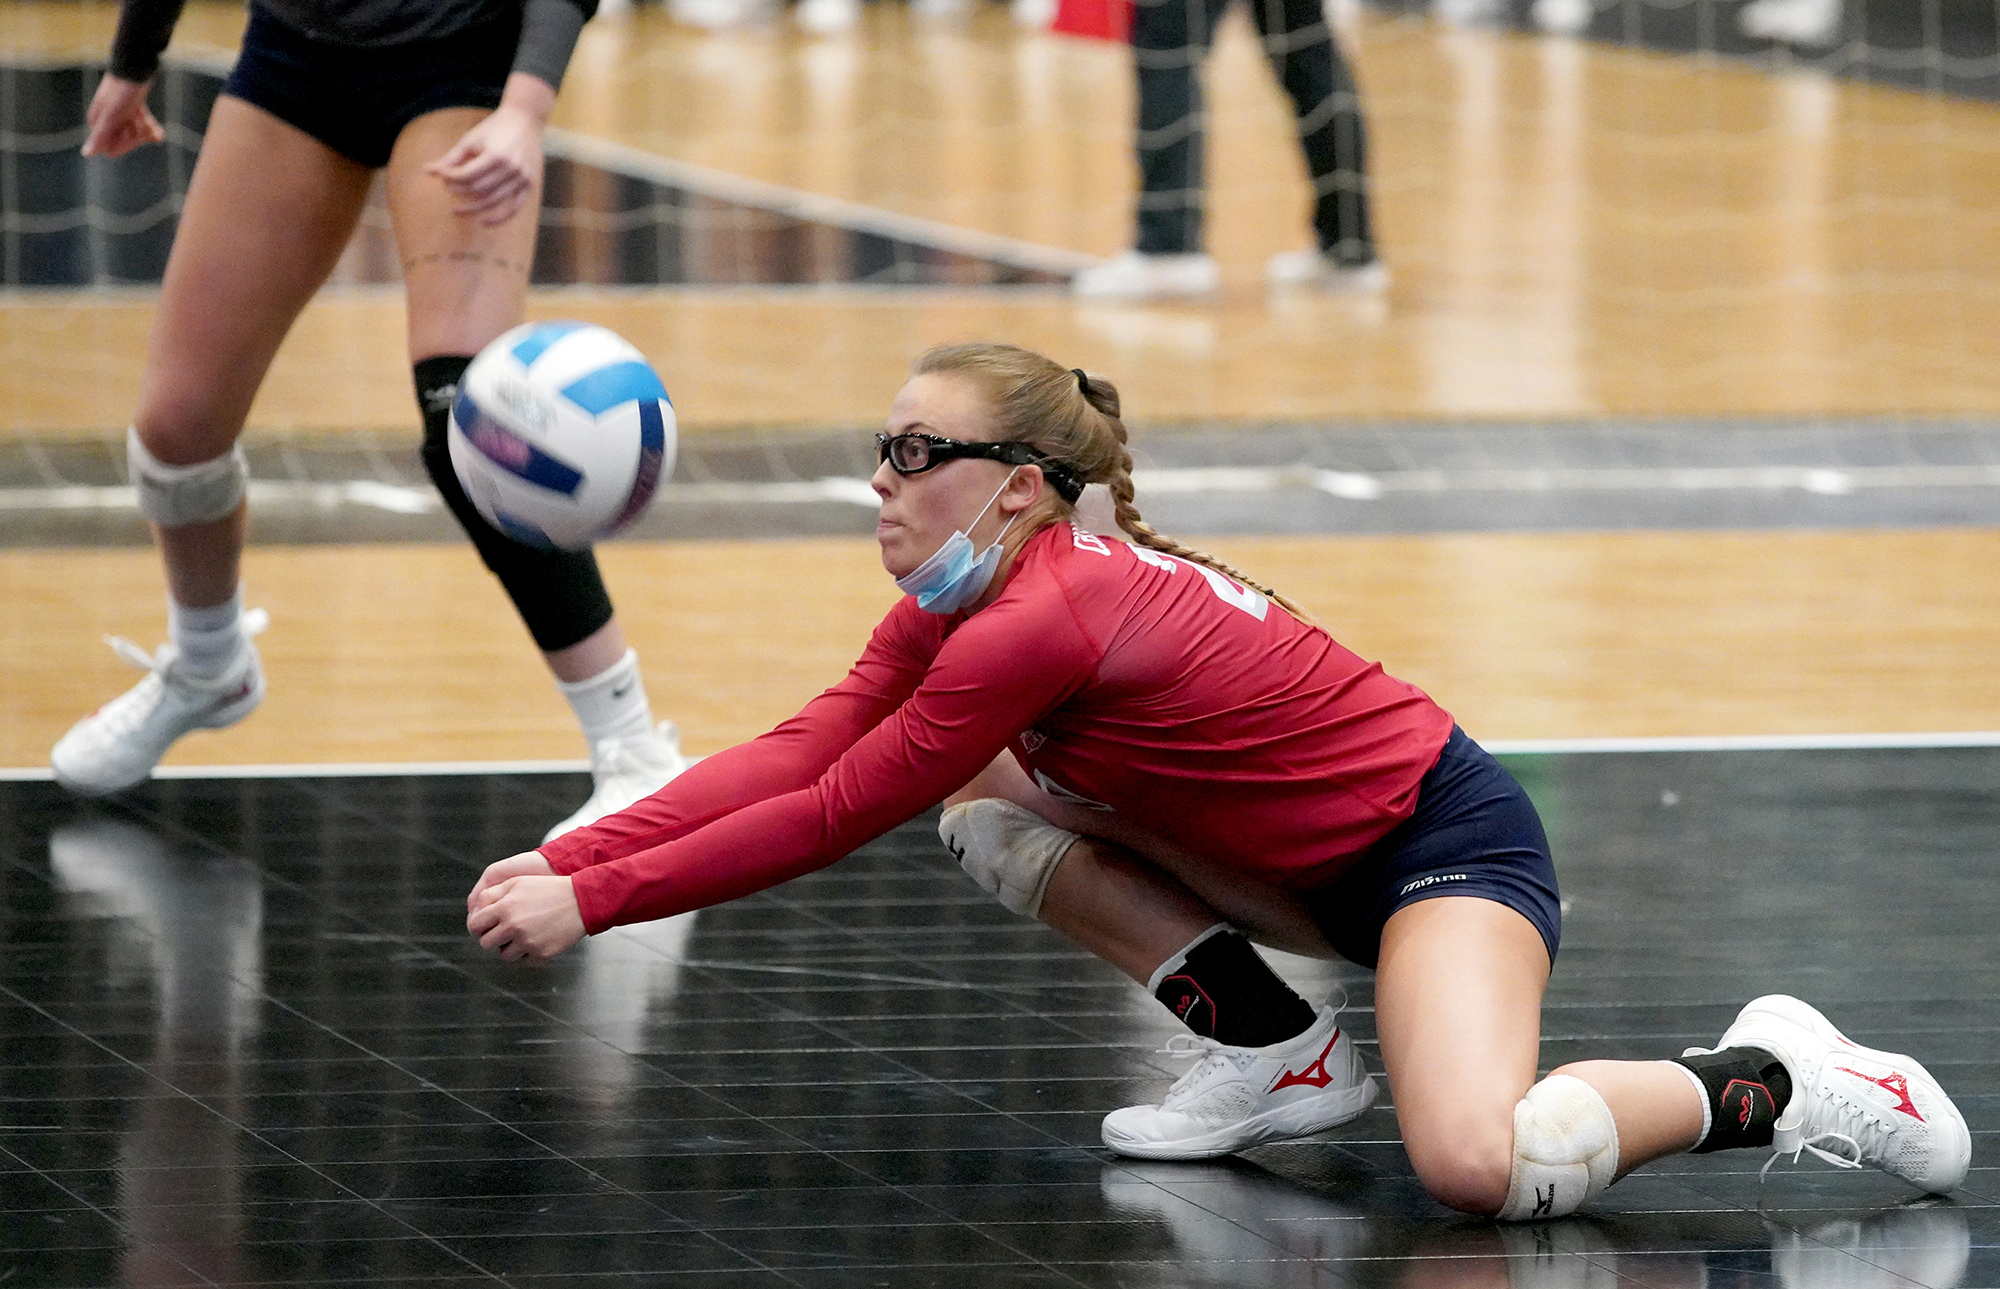 Volleyball player digging ball